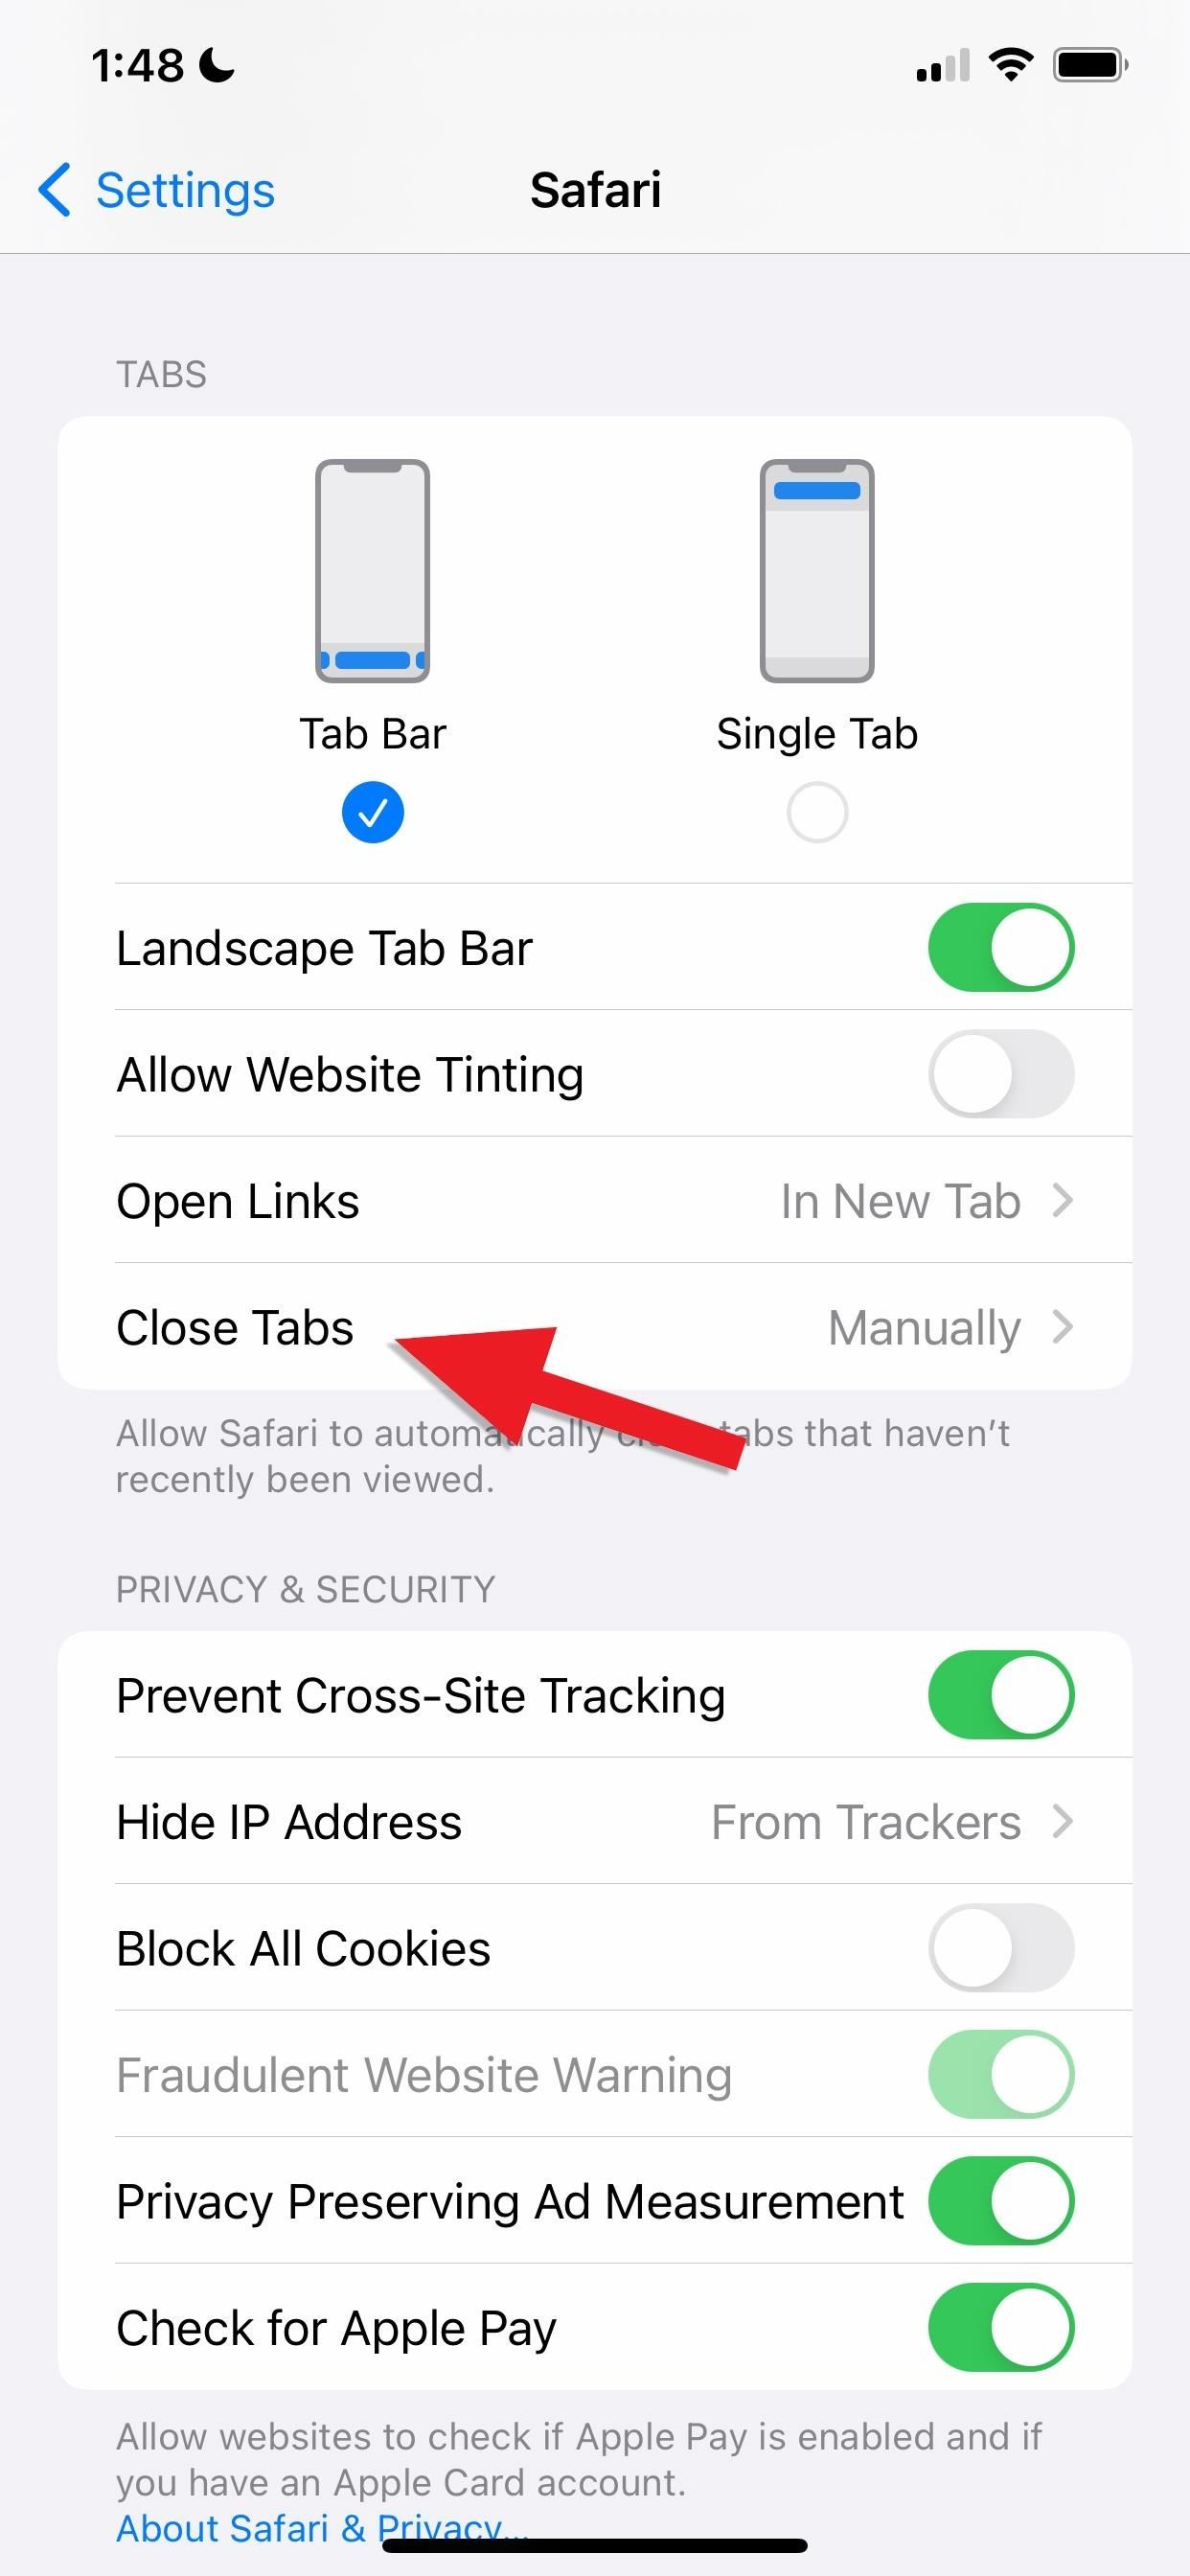 Make Your iPhone Automatically Close Old Tabs So Safari Doesn't Become a Hot Mess